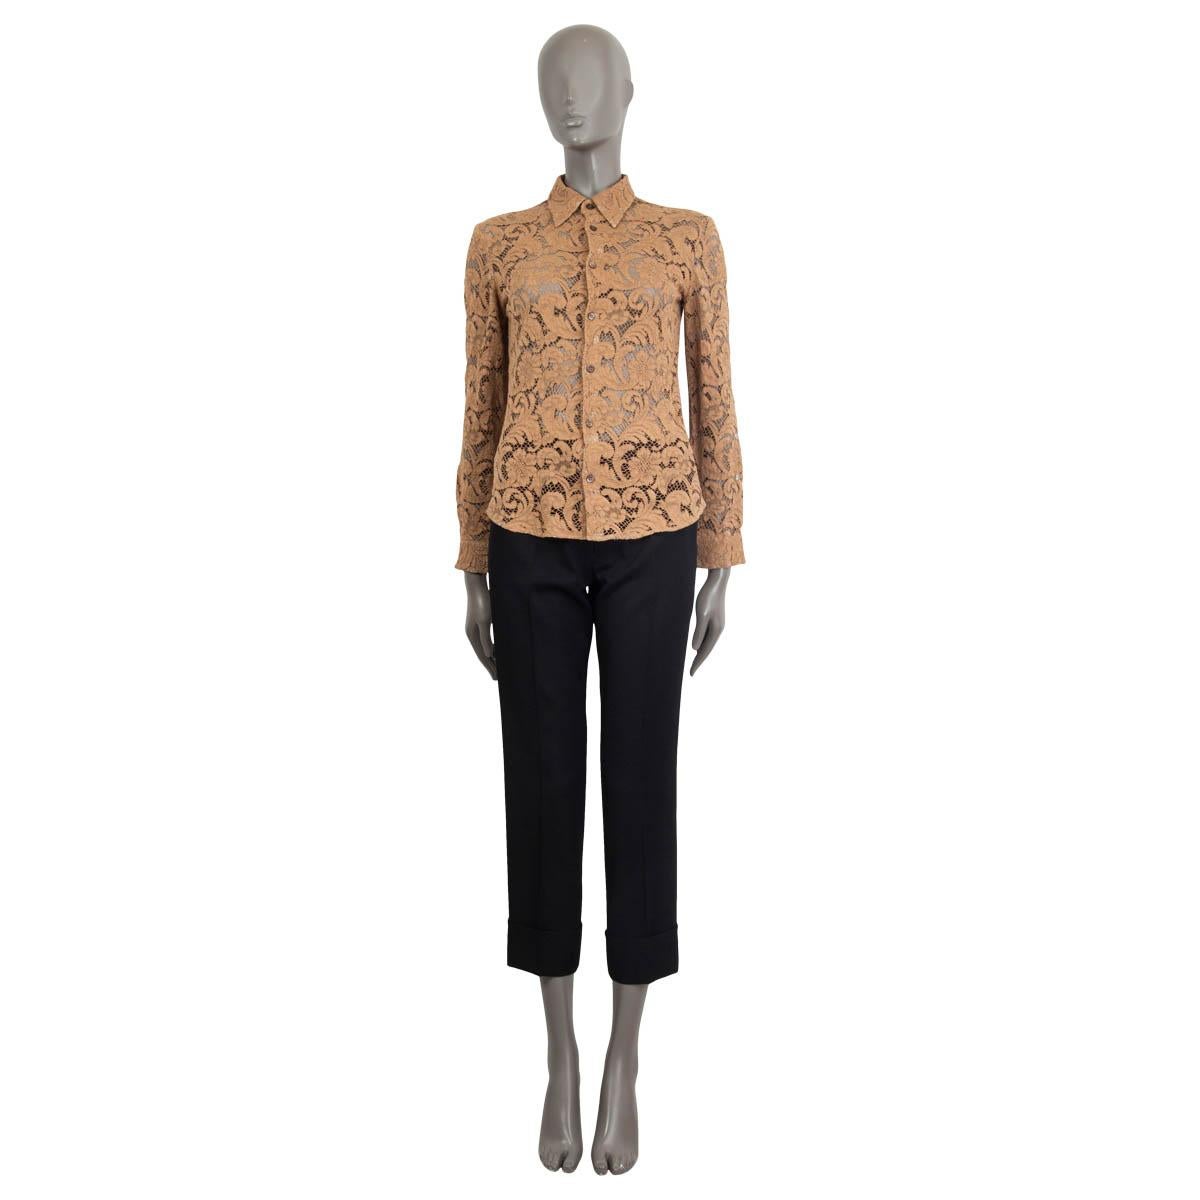 100% authentic Prada long-sleeve semi-sheer lace shirt in light brown viscose blend (assumed cause tag is missing). Features buttoned cuffs and a point collar. Opens with buttons on the front. Unlined. One button is broken, otherwise in excellent